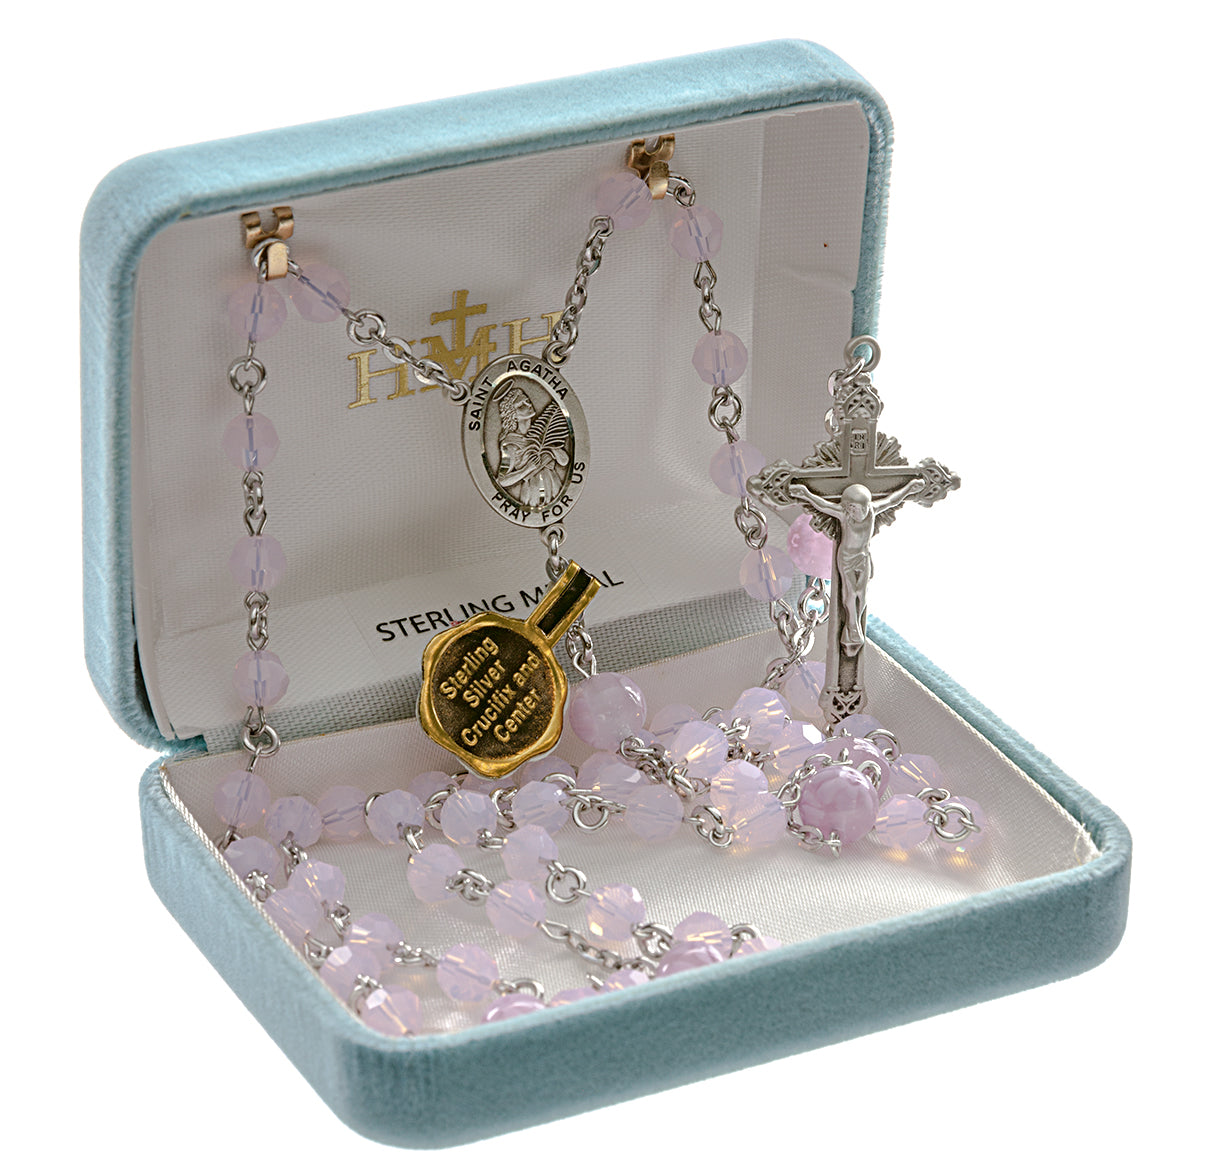 Saint Agatha Rosary Sterling Crucifix and Centerpiece Created with Swarovski Crystal 6mm Pink Opal Beads by HMH